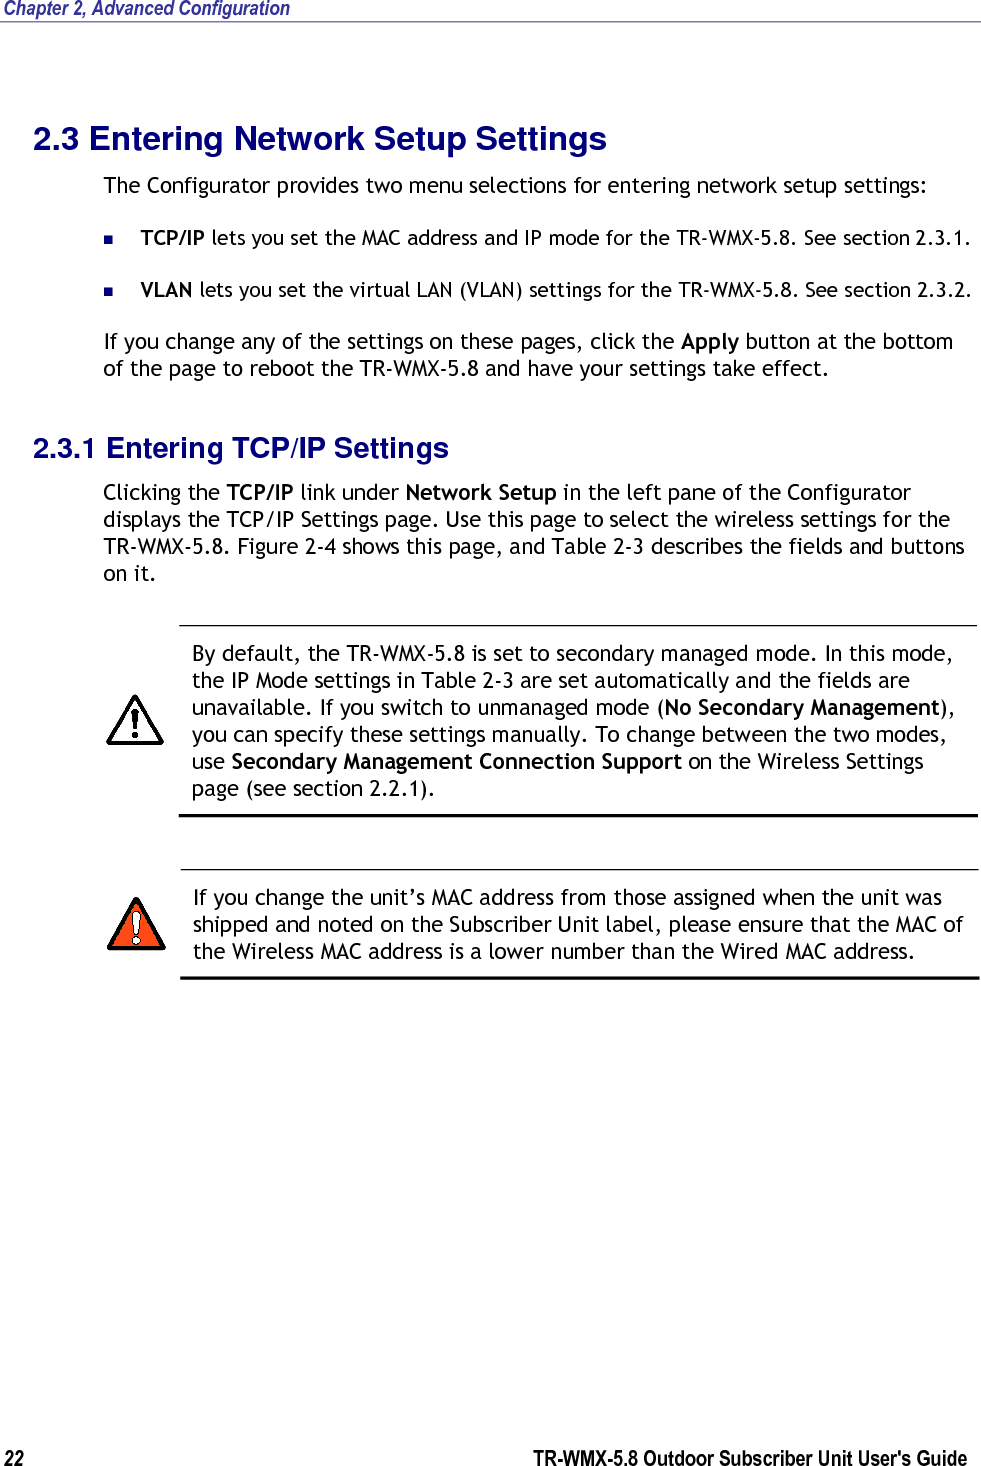 Chapter 2, Advanced Configuration 22        TR-WMX-5.8 Outdoor Subscriber Unit User&apos;s Guide  2.3 Entering Network Setup Settings The Configurator provides two menu selections for entering network setup settings:  TCP/IP lets you set the MAC address and IP mode for the TR-WMX-5.8. See section 2.3.1.  VLAN lets you set the virtual LAN (VLAN) settings for the TR-WMX-5.8. See section 2.3.2. If you change any of the settings on these pages, click the Apply button at the bottom of the page to reboot the TR-WMX-5.8 and have your settings take effect. 2.3.1 Entering TCP/IP Settings Clicking the TCP/IP link under Network Setup in the left pane of the Configurator displays the TCP/IP Settings page. Use this page to select the wireless settings for the TR-WMX-5.8. Figure 2-4 shows this page, and Table 2-3 describes the fields and buttons on it.   By default, the TR-WMX-5.8 is set to secondary managed mode. In this mode, the IP Mode settings in Table 2-3 are set automatically and the fields are unavailable. If you switch to unmanaged mode (No Secondary Management), you can specify these settings manually. To change between the two modes, use Secondary Management Connection Support on the Wireless Settings page (see section 2.2.1).   If you change the unit’s MAC address from those assigned when the unit was shipped and noted on the Subscriber Unit label, please ensure that the MAC of the Wireless MAC address is a lower number than the Wired MAC address. 